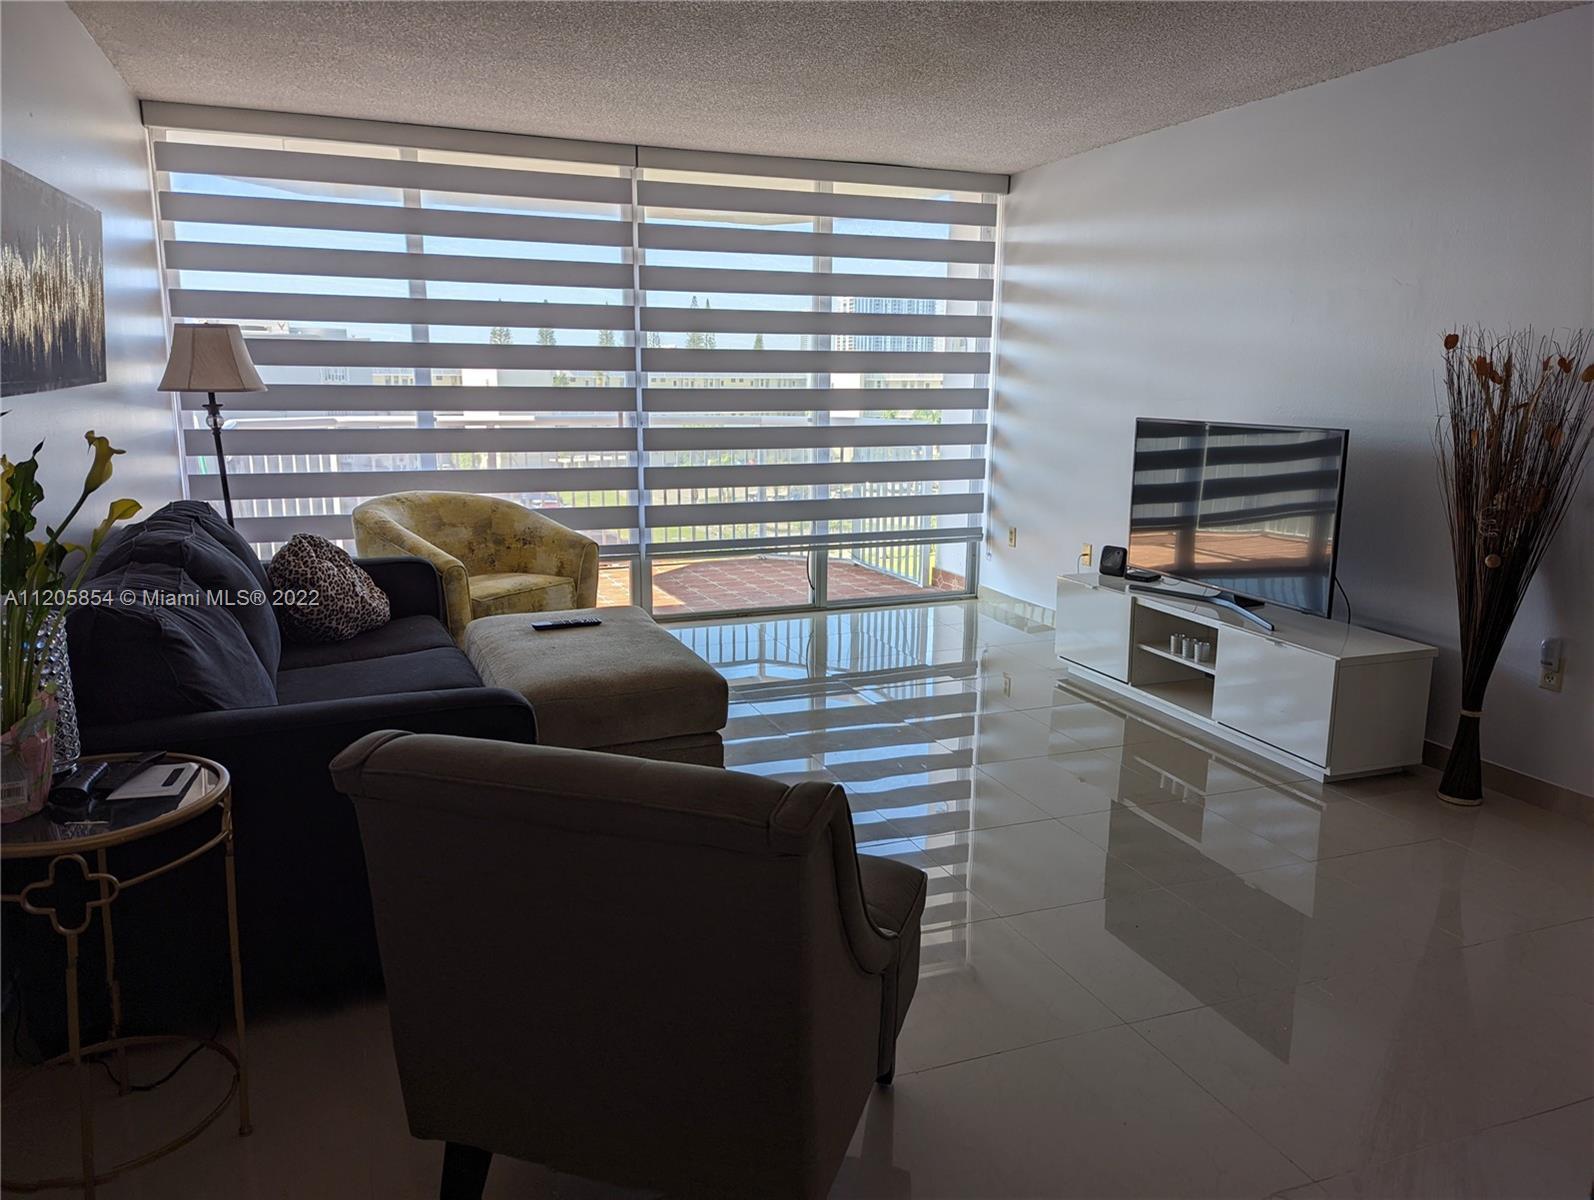 Completely remodeled from top to bottom. Enjoy this beautiful 1 bedroom/ 1.5 bath unit with tons of 